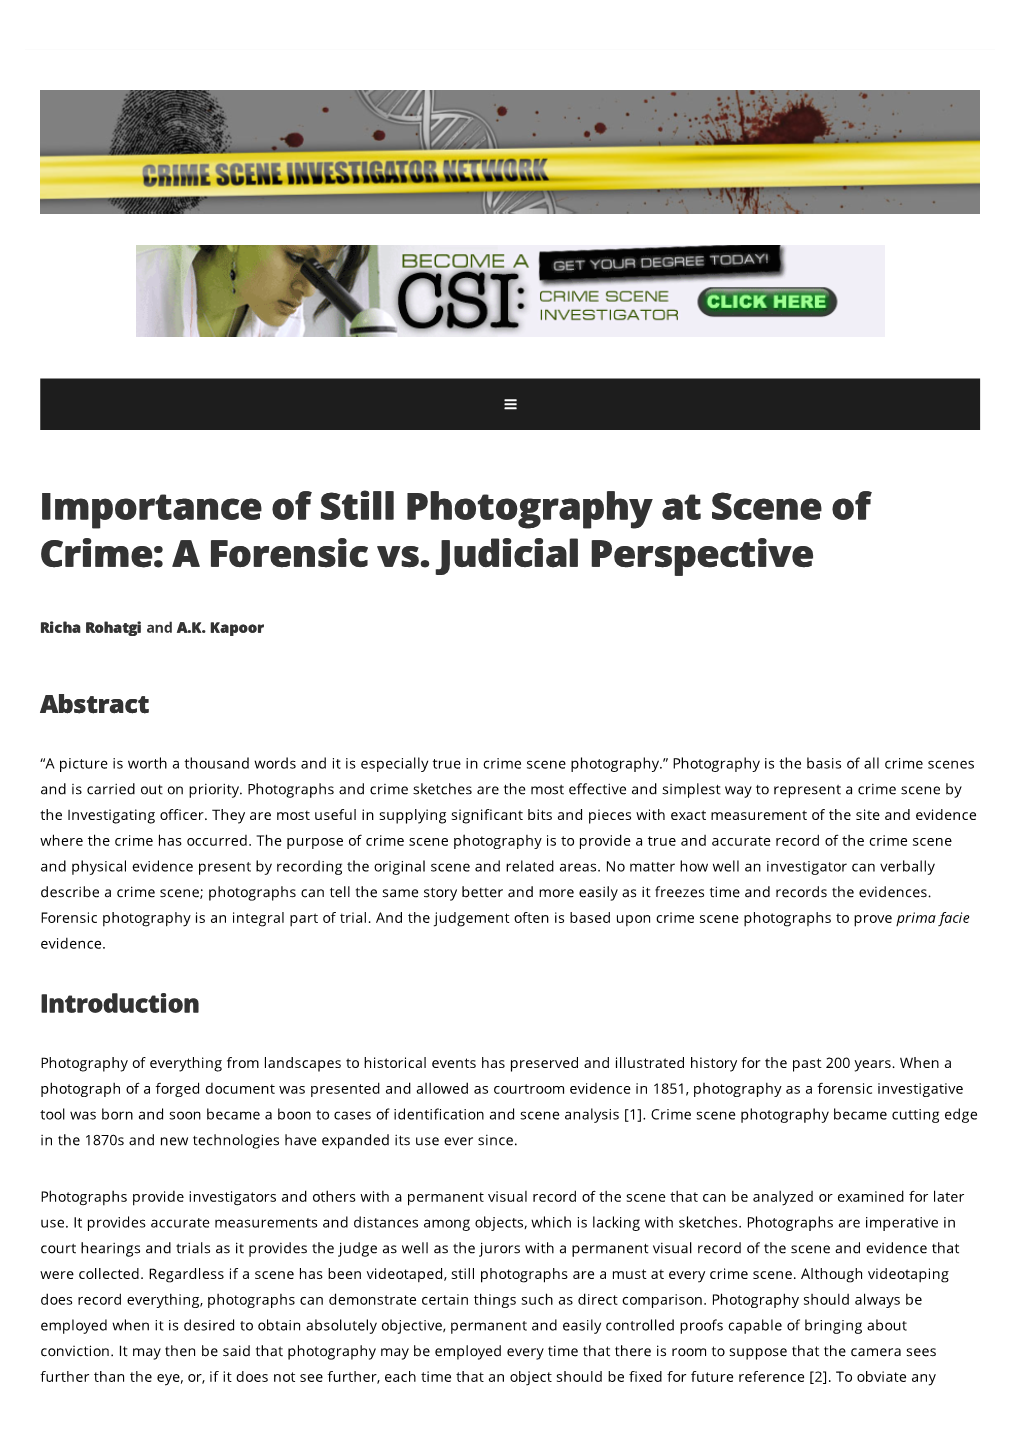 Importance of Still Photography at Scene of Crime: a Forensic Vs